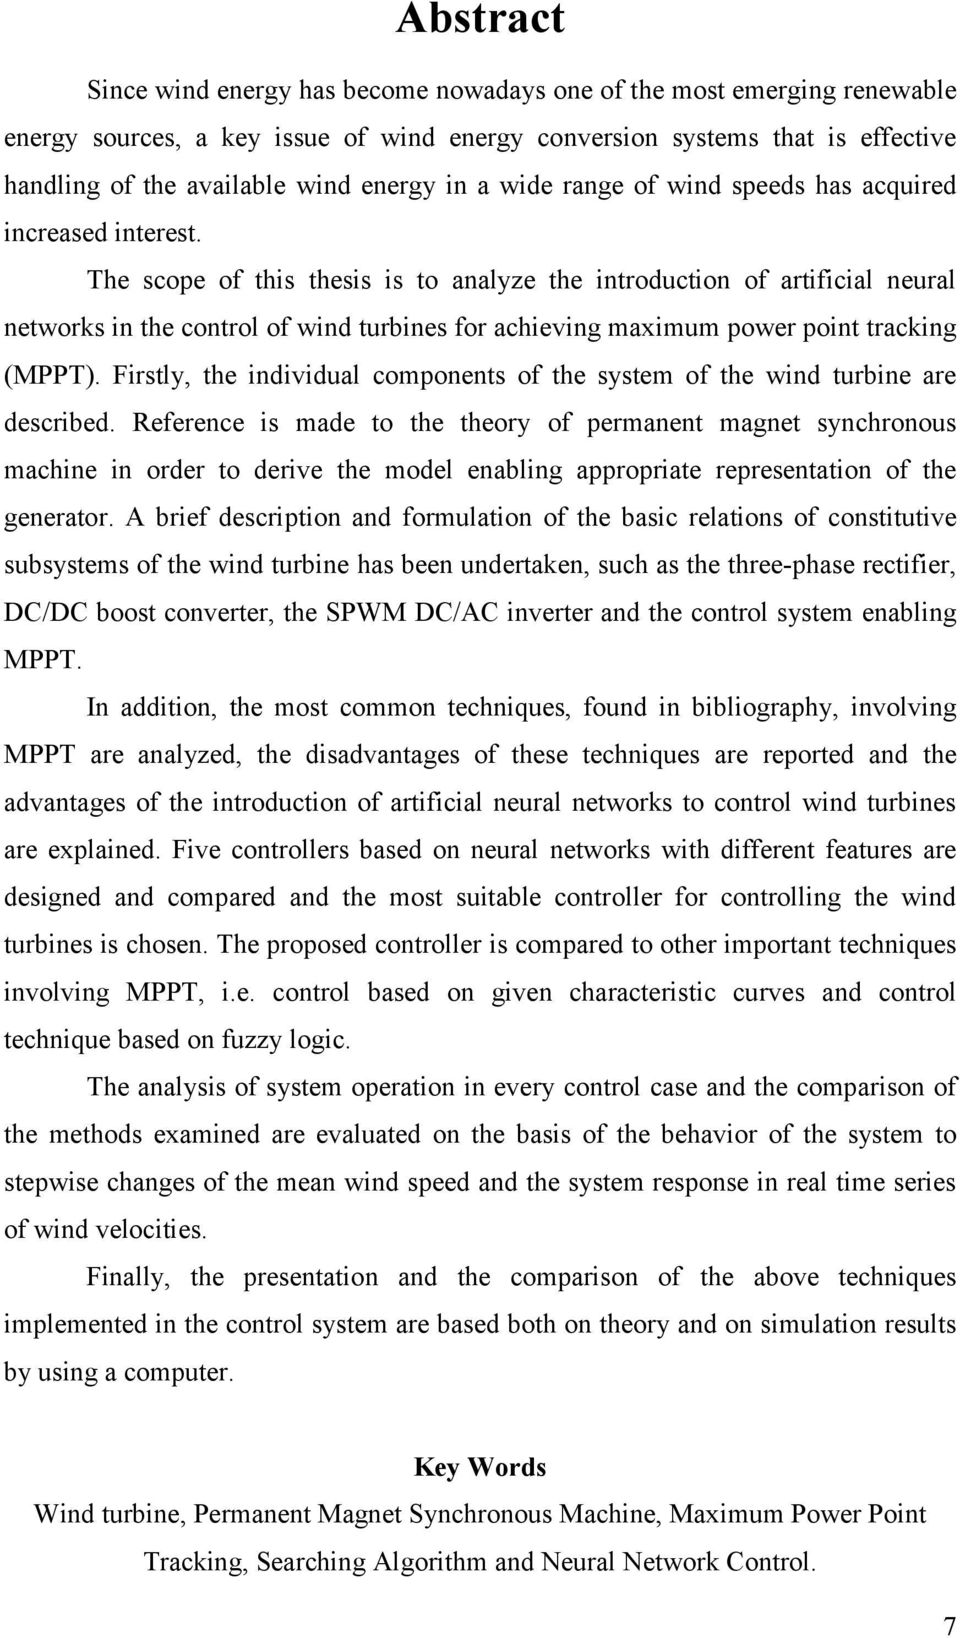 The scope of this thesis is to analyze the introduction of artificial neural networks in the control of wind turbines for achieving maximum power point tracking (MPPT).